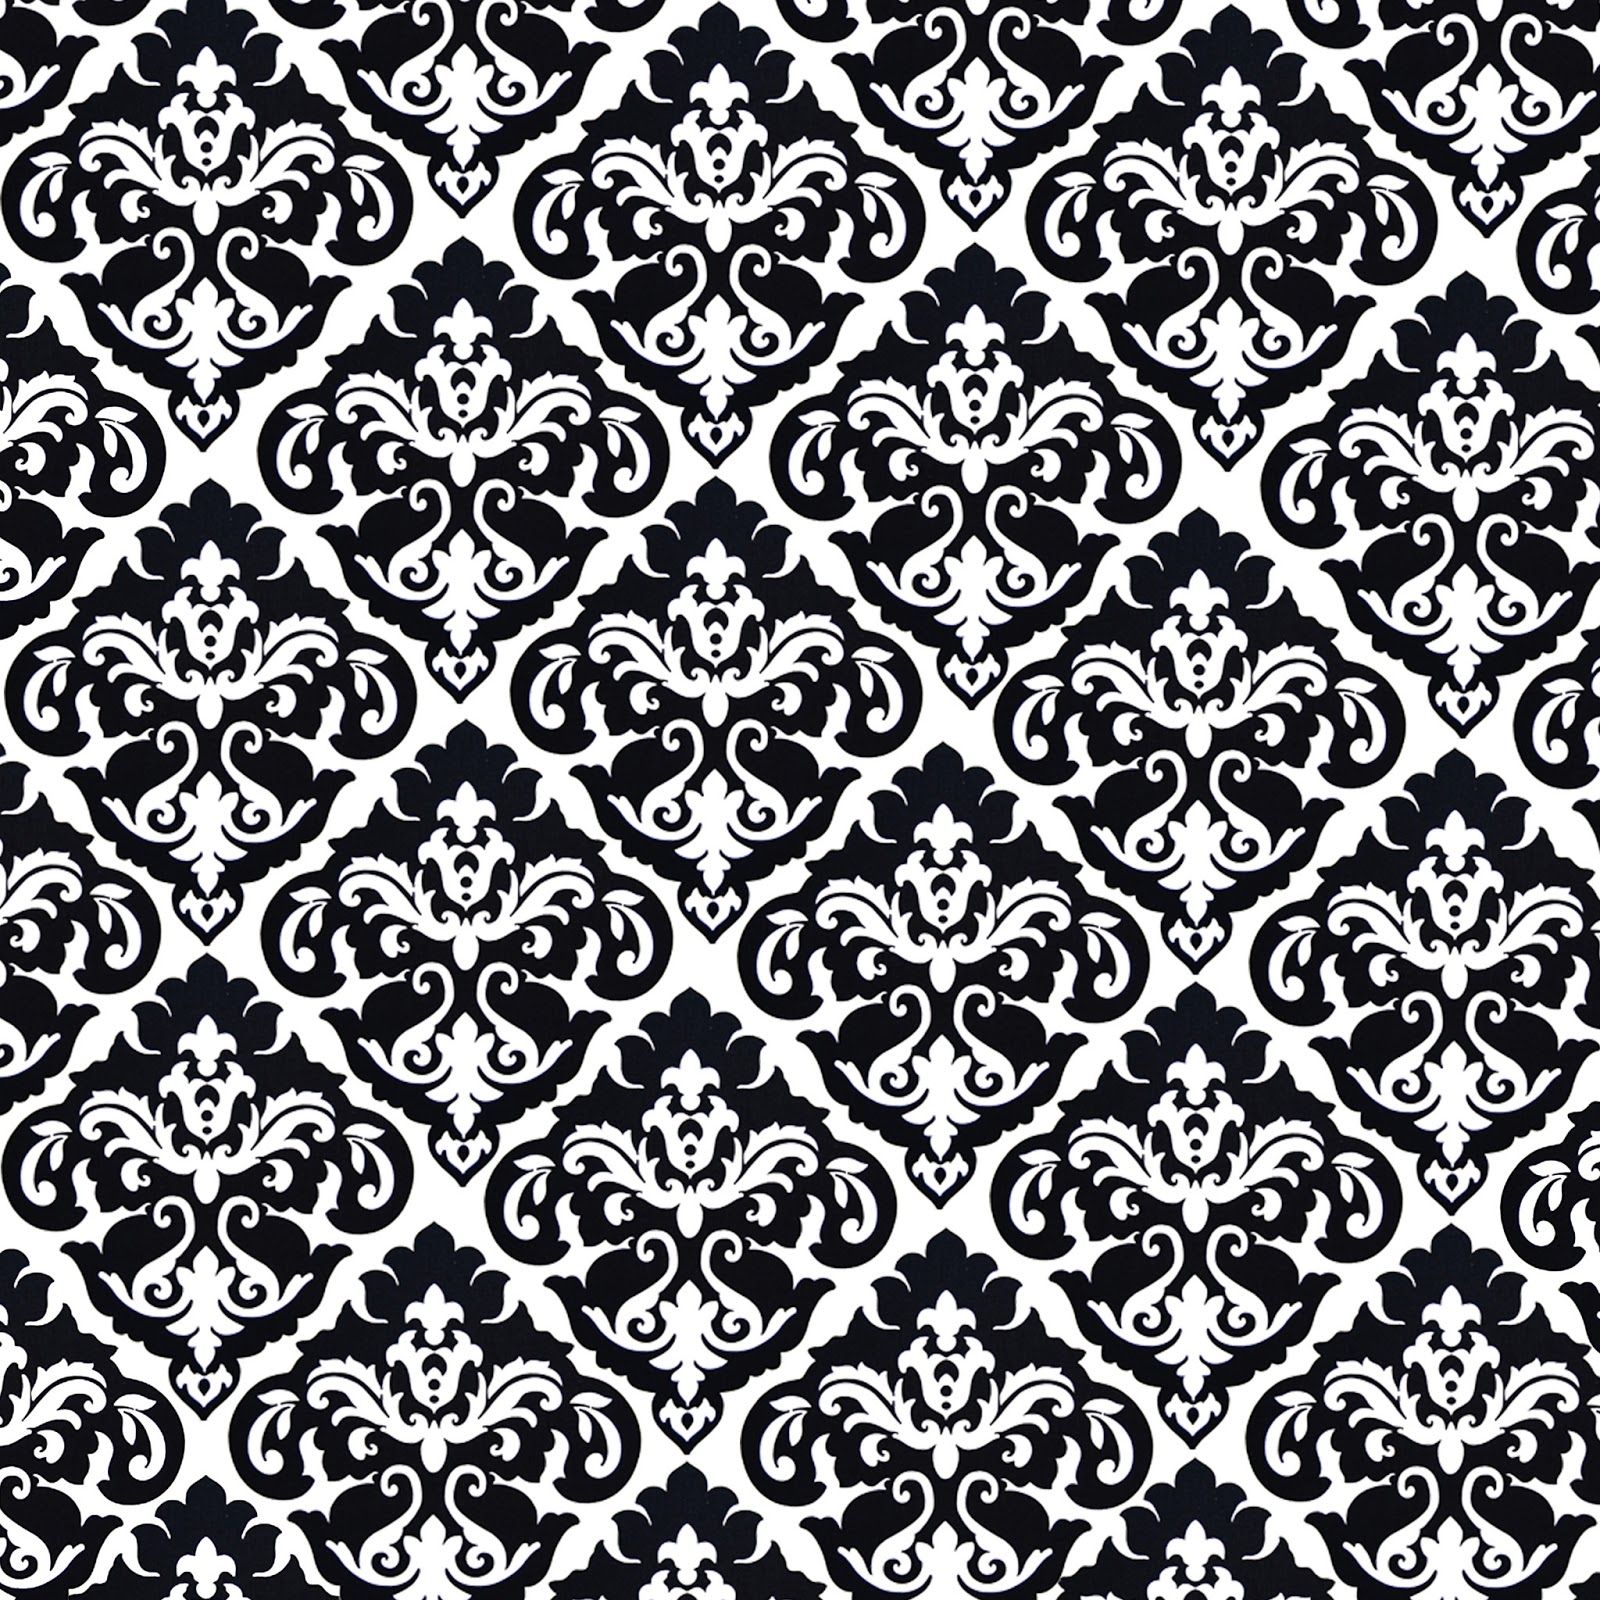 Black And White Damask Pattern Wallpaperawsome Backgrounds Wallpapers